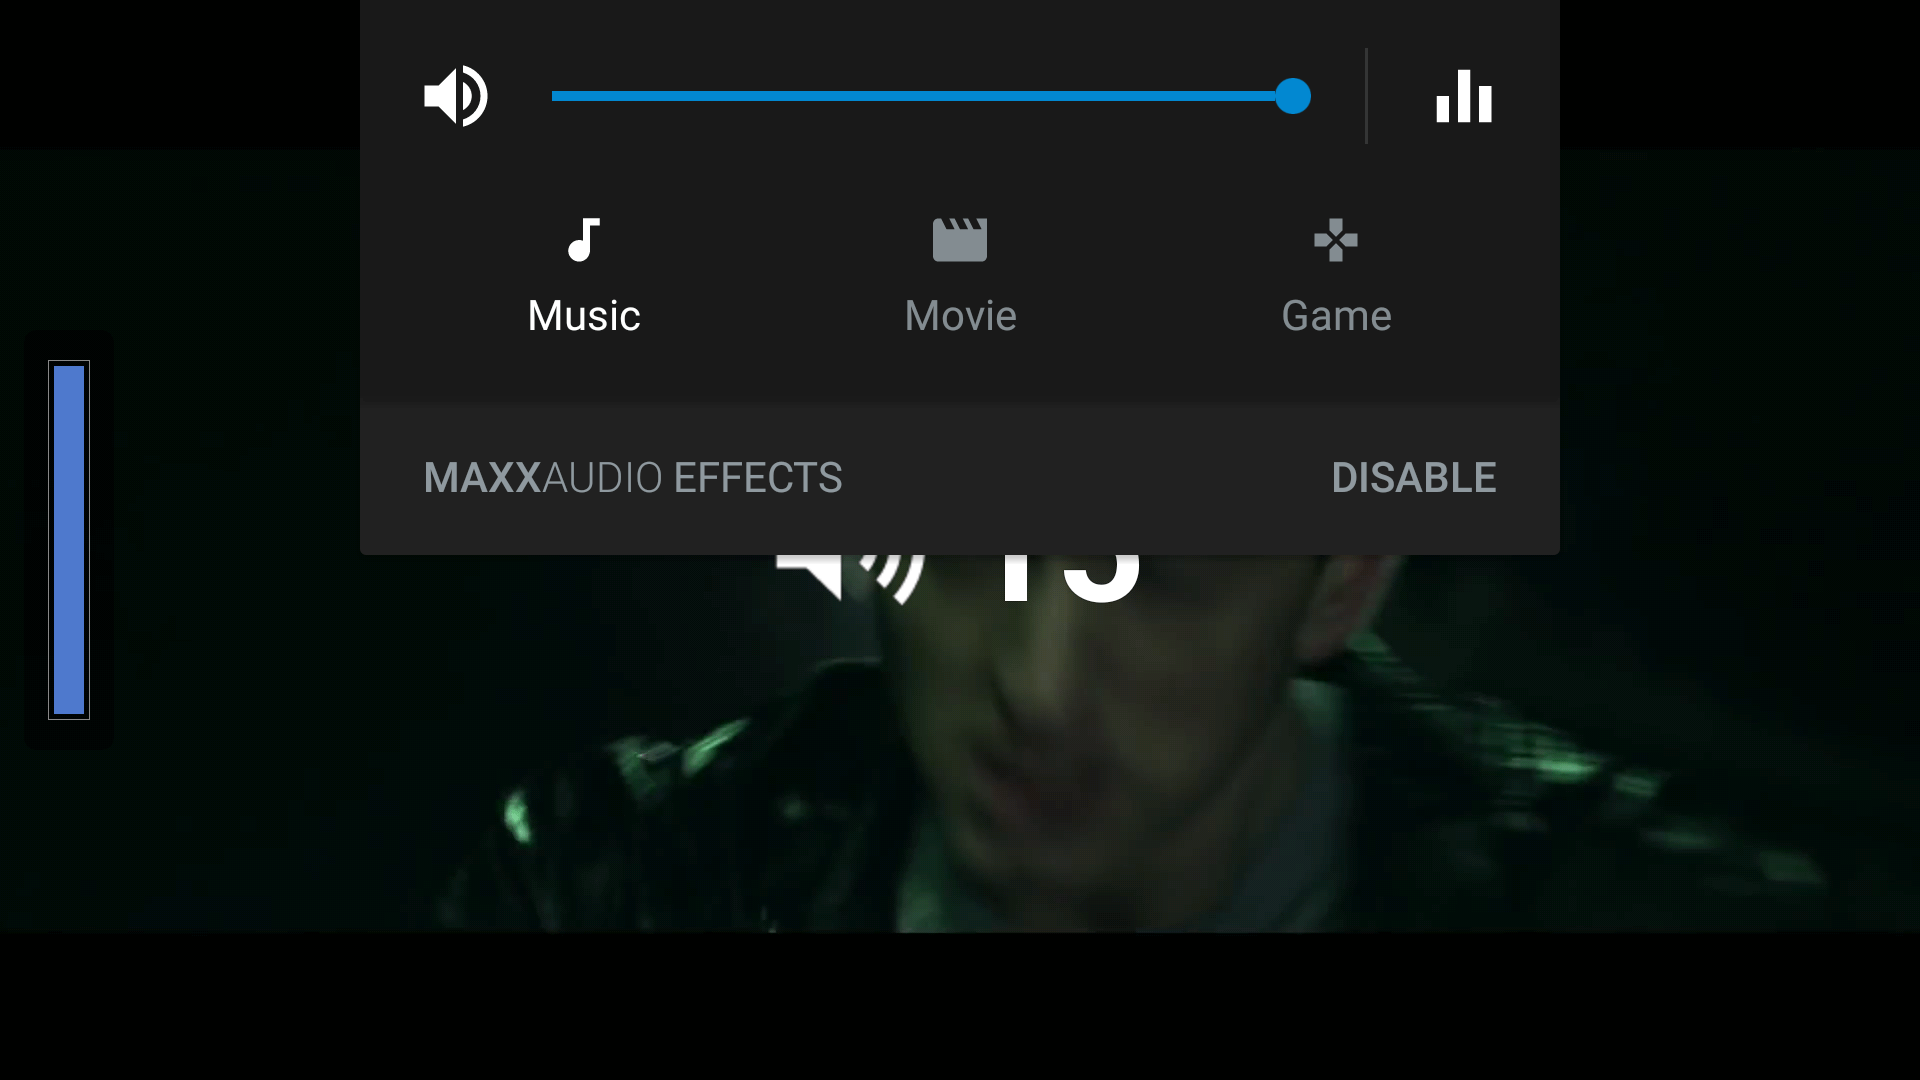 MAXXAUDIO is supposed to enhance the audio experience